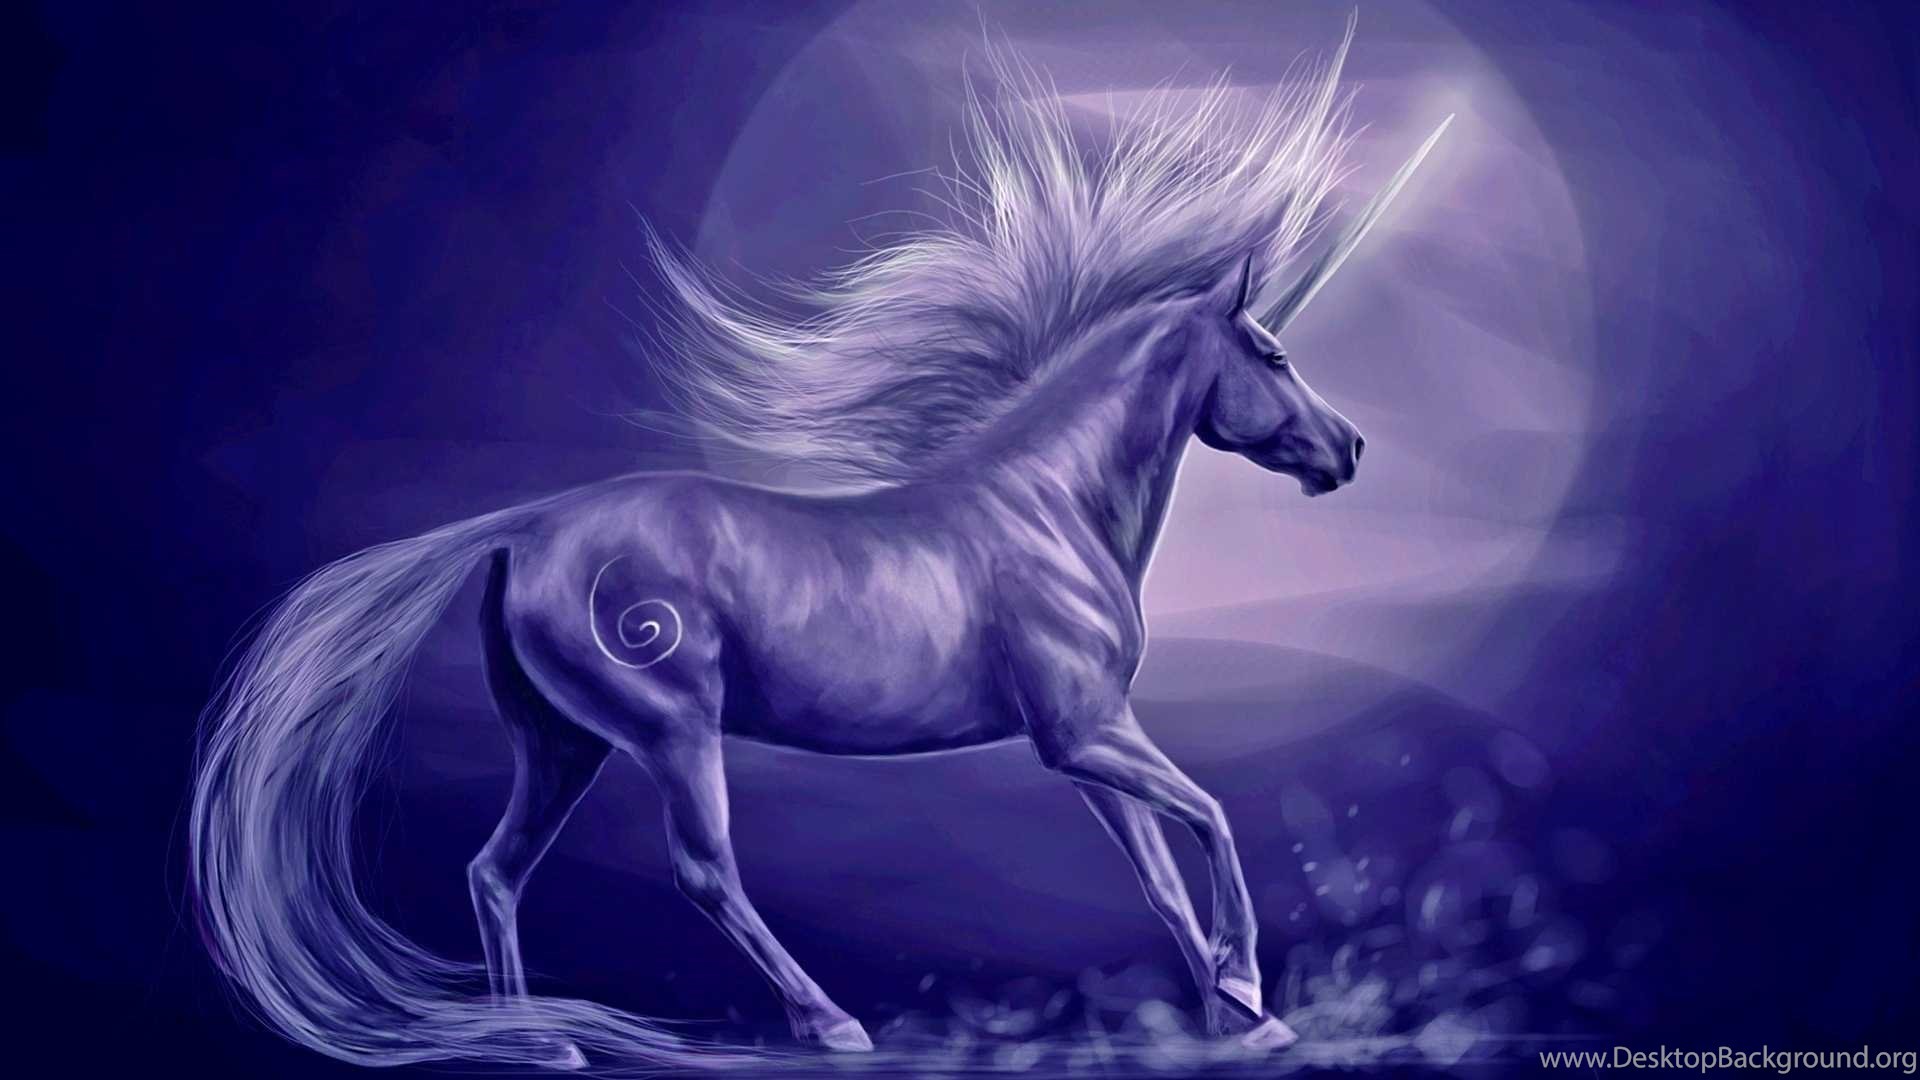 1920x1080 Unicorn Wallpapers HD Best Collection With Unicorn Pictures